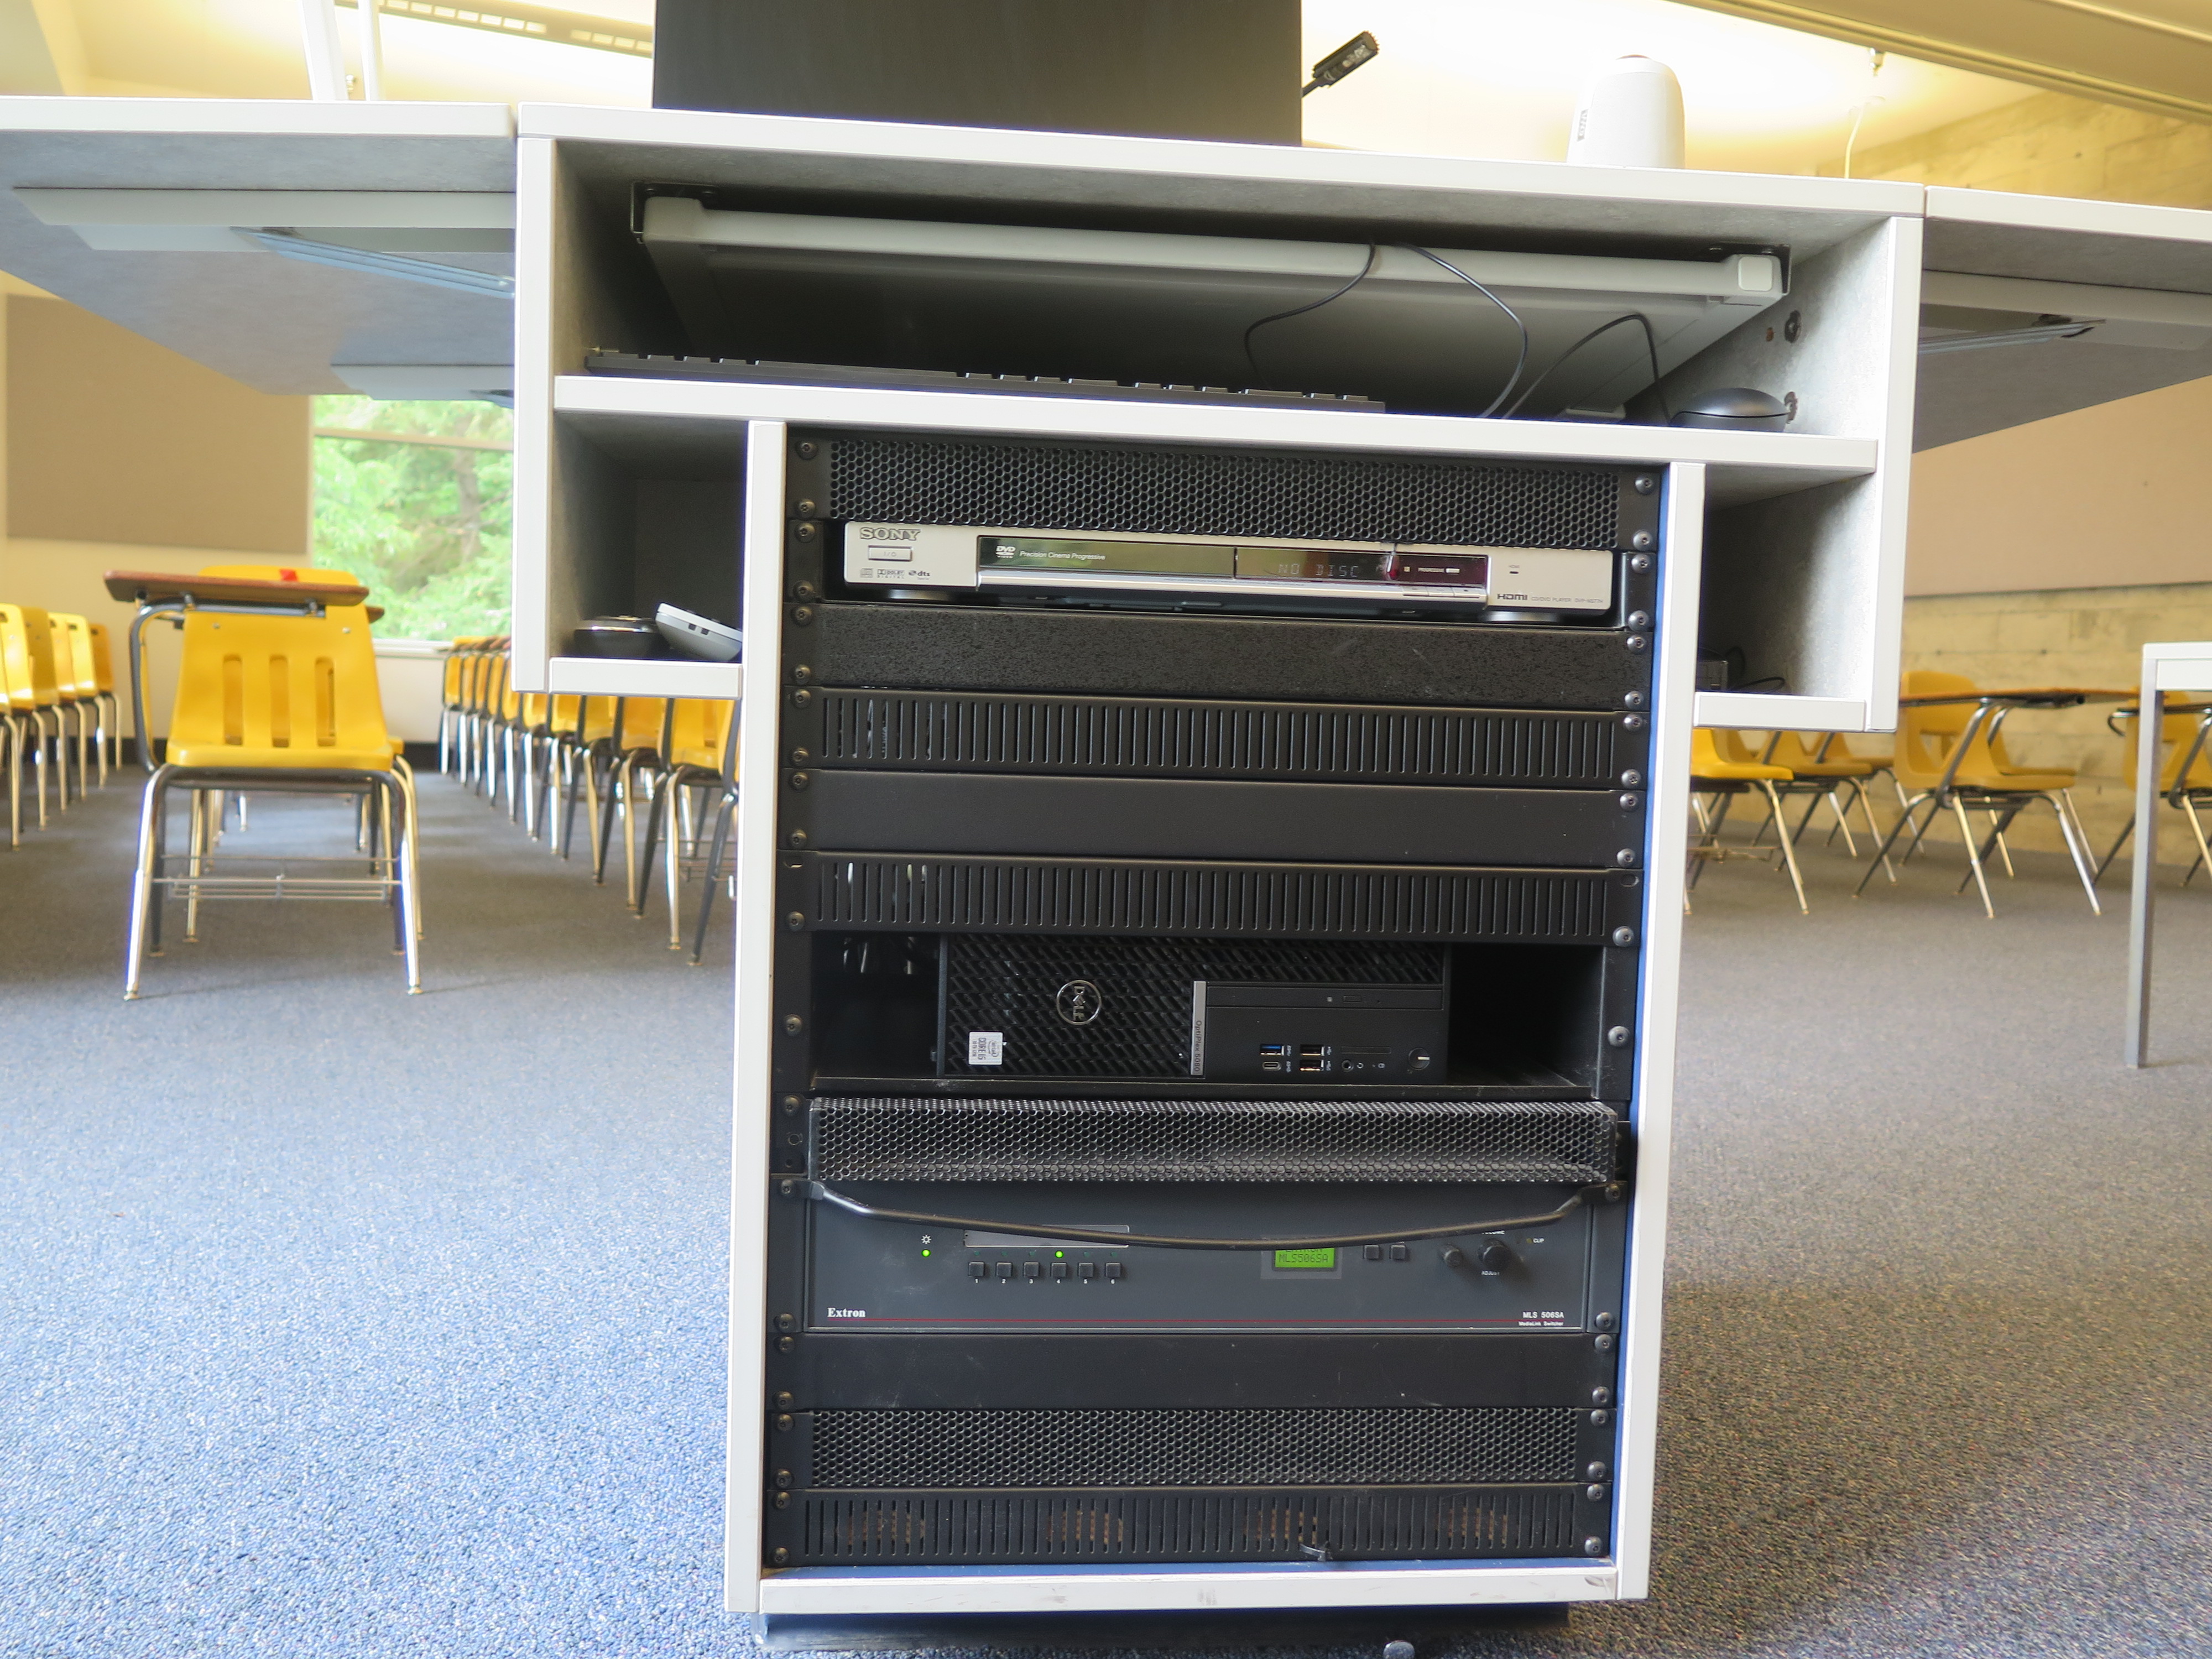 Display rack consists of a DVD player, a Dell Computer CPU, and a Extron switcher.